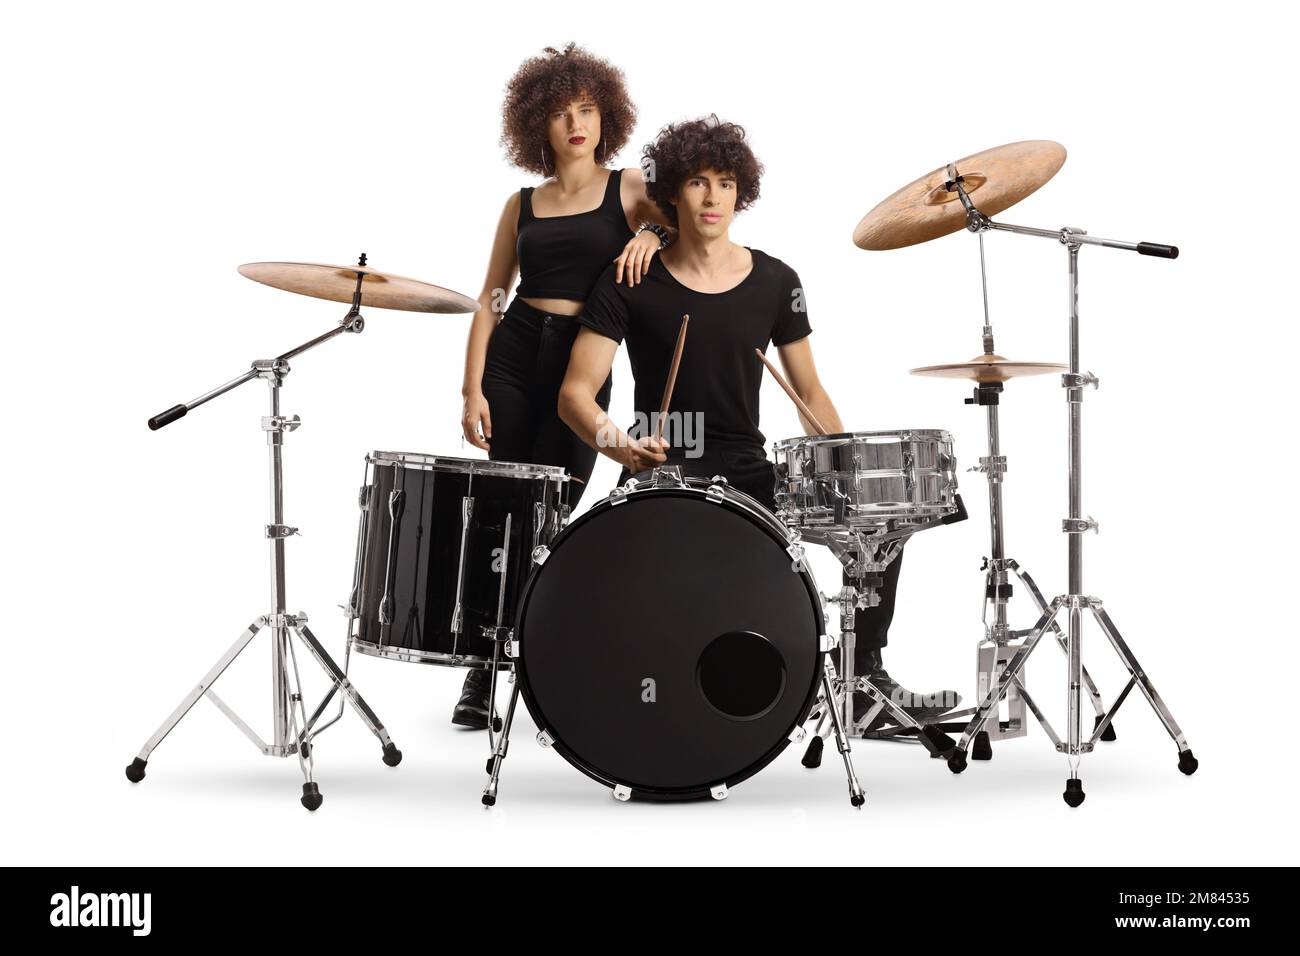 Male and female drummers posing with a drum kit isolated on white background Stock Photo